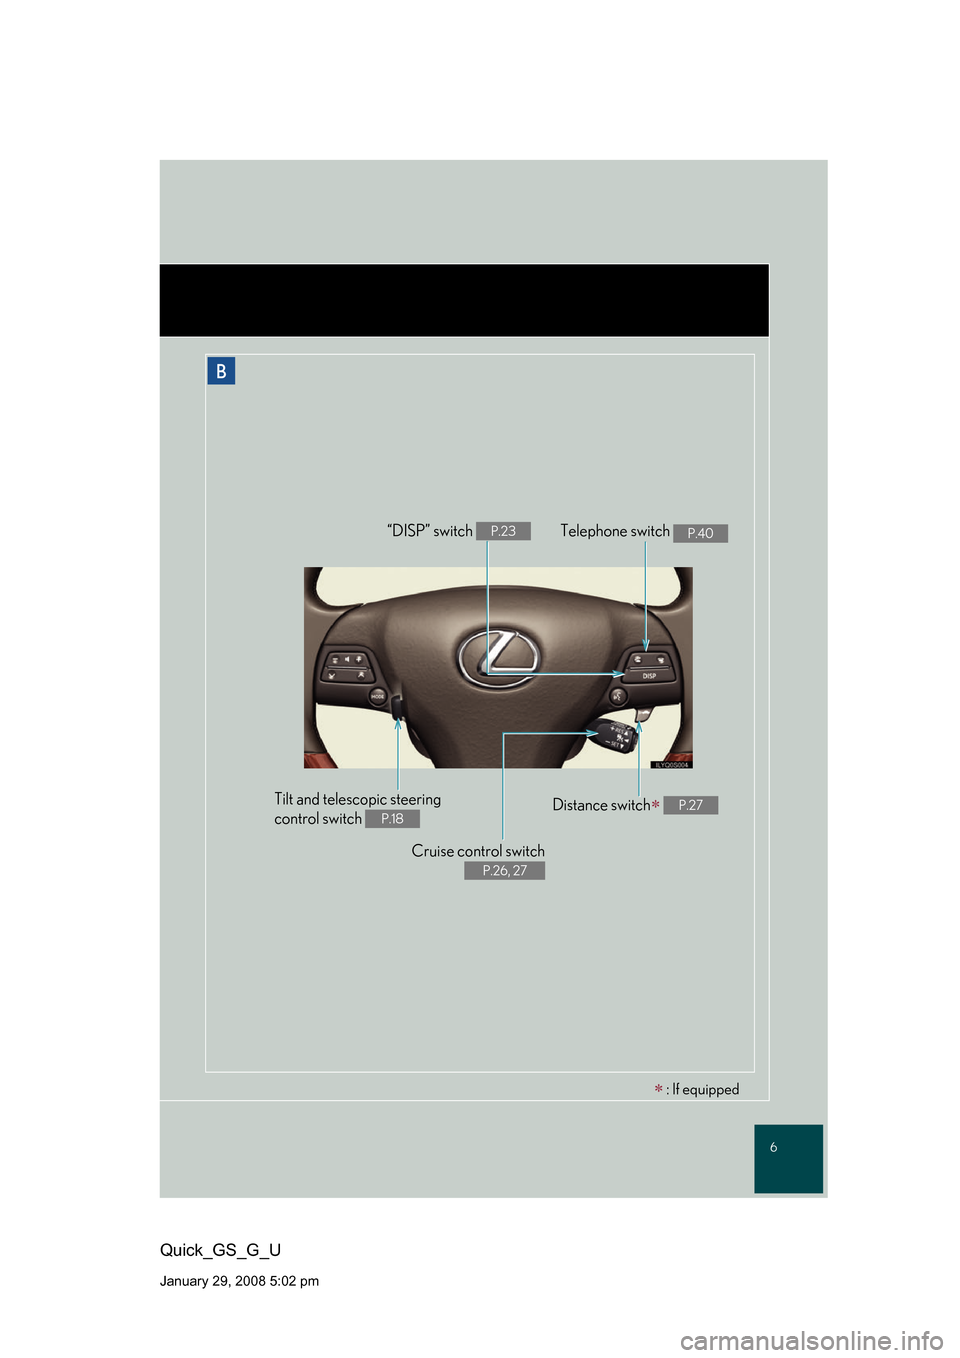 Lexus GS350 2008  Specifications / LEXUS 2008 GS460/350 QUICK GUIDE OWNERS MANUAL (OM30B04U) 6
Quick_GS_G_U
January 29, 2008 5:02 pm
B
Cruise control switch  
P.26, 27
Telephone switch P.40“DISP” switch P.23
Distance switch P.27Tilt and telescopic steering  
control switch 
P.18
